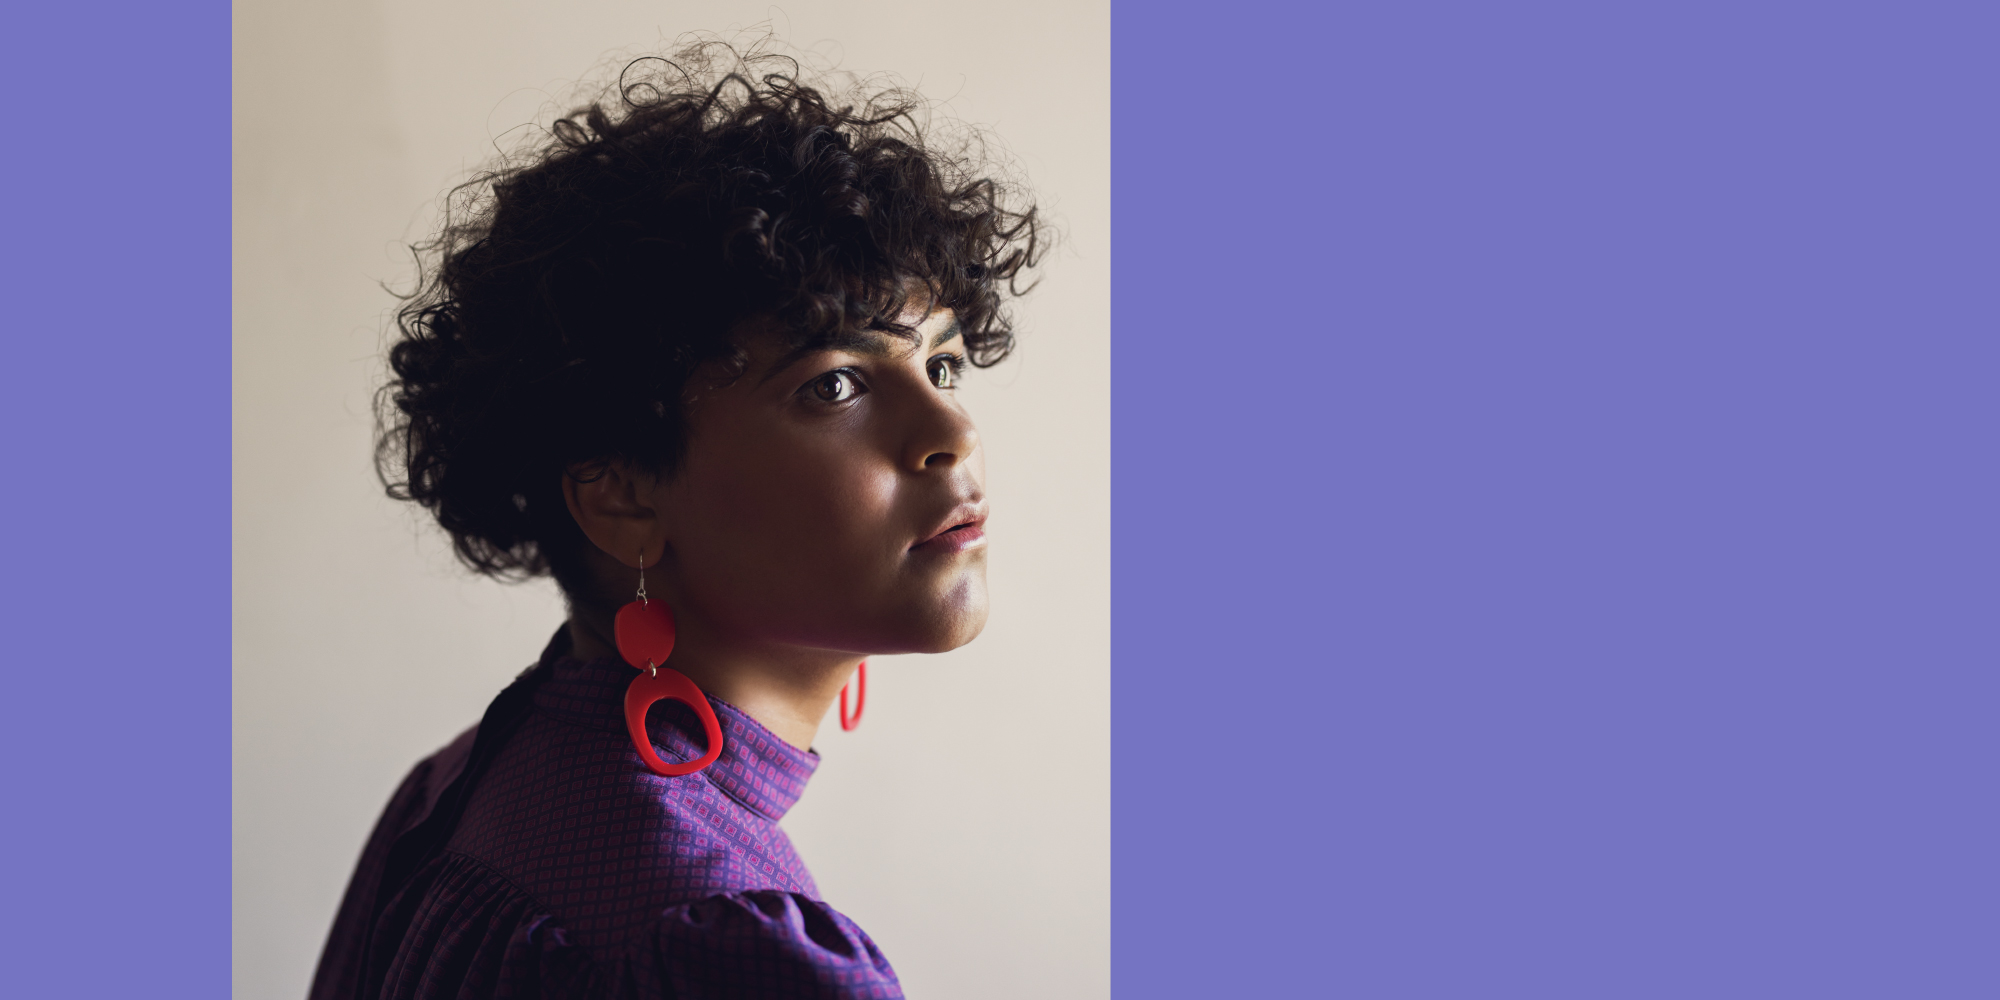 A model gazing away from the camera wearing red droplet earrings designed by contemporary Indigenous designer and Alumnus, Warren Steven Scott.